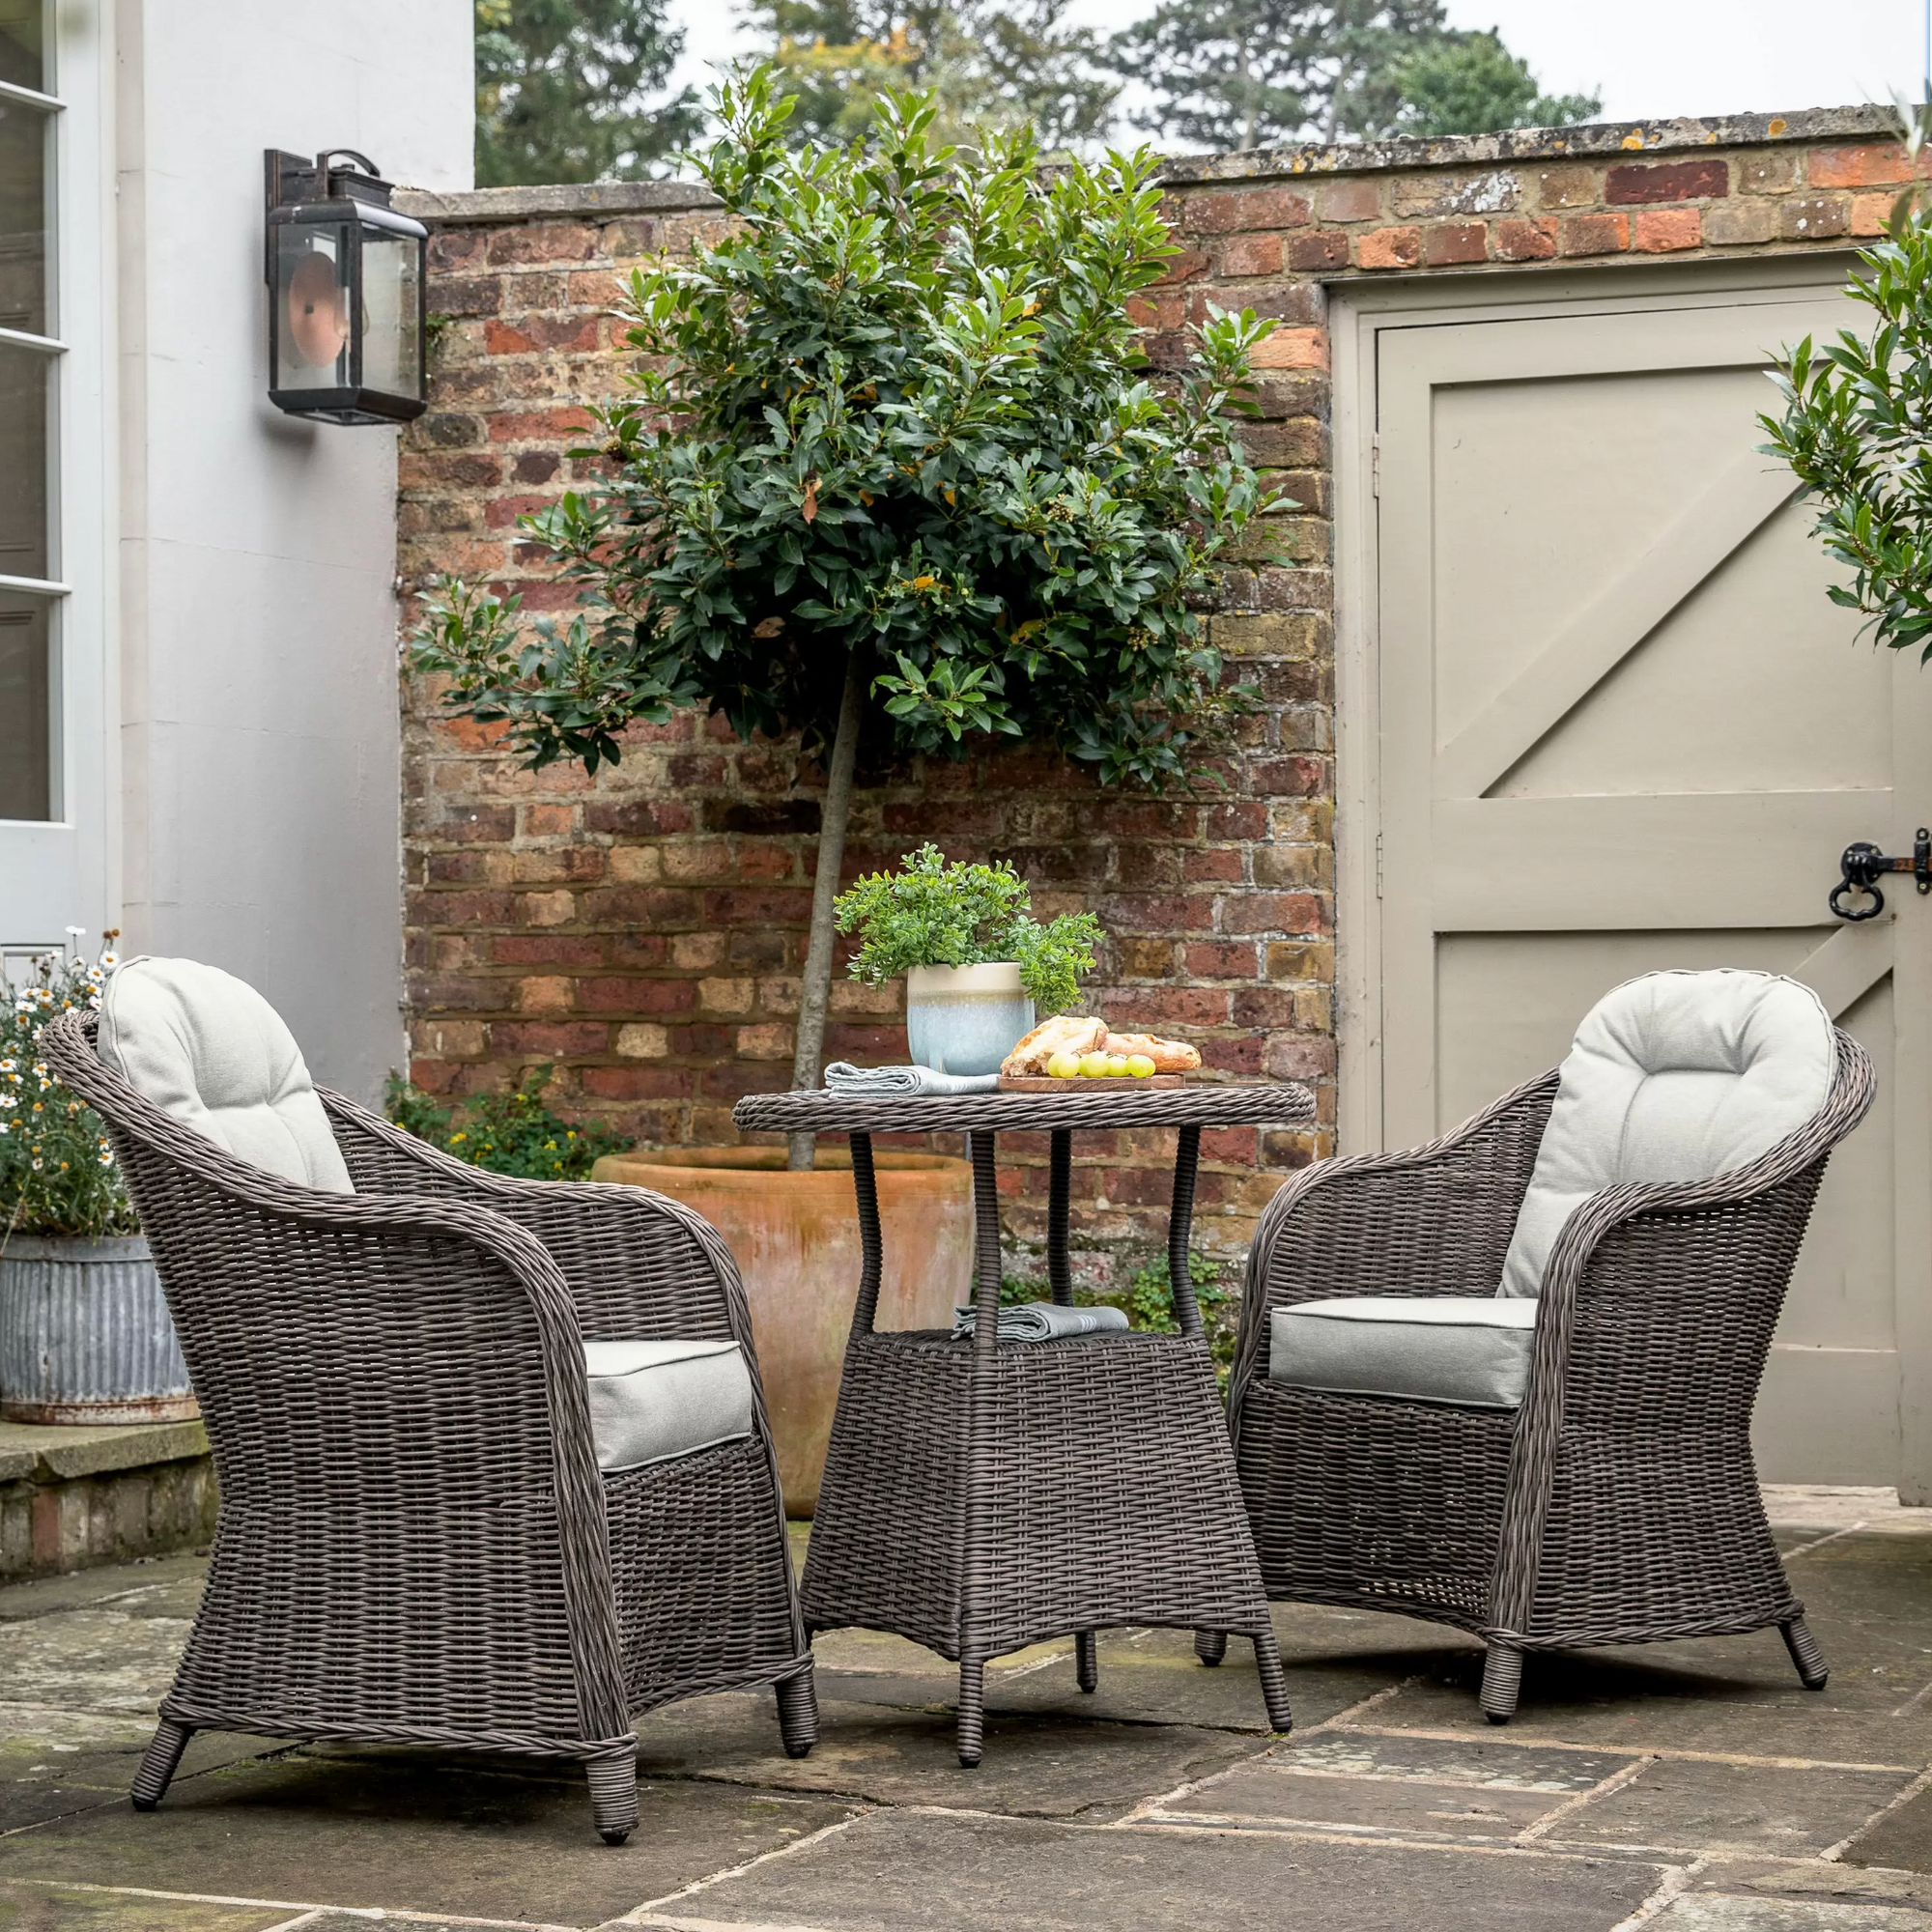 Rattan Bistro Set For Two in courtyard.